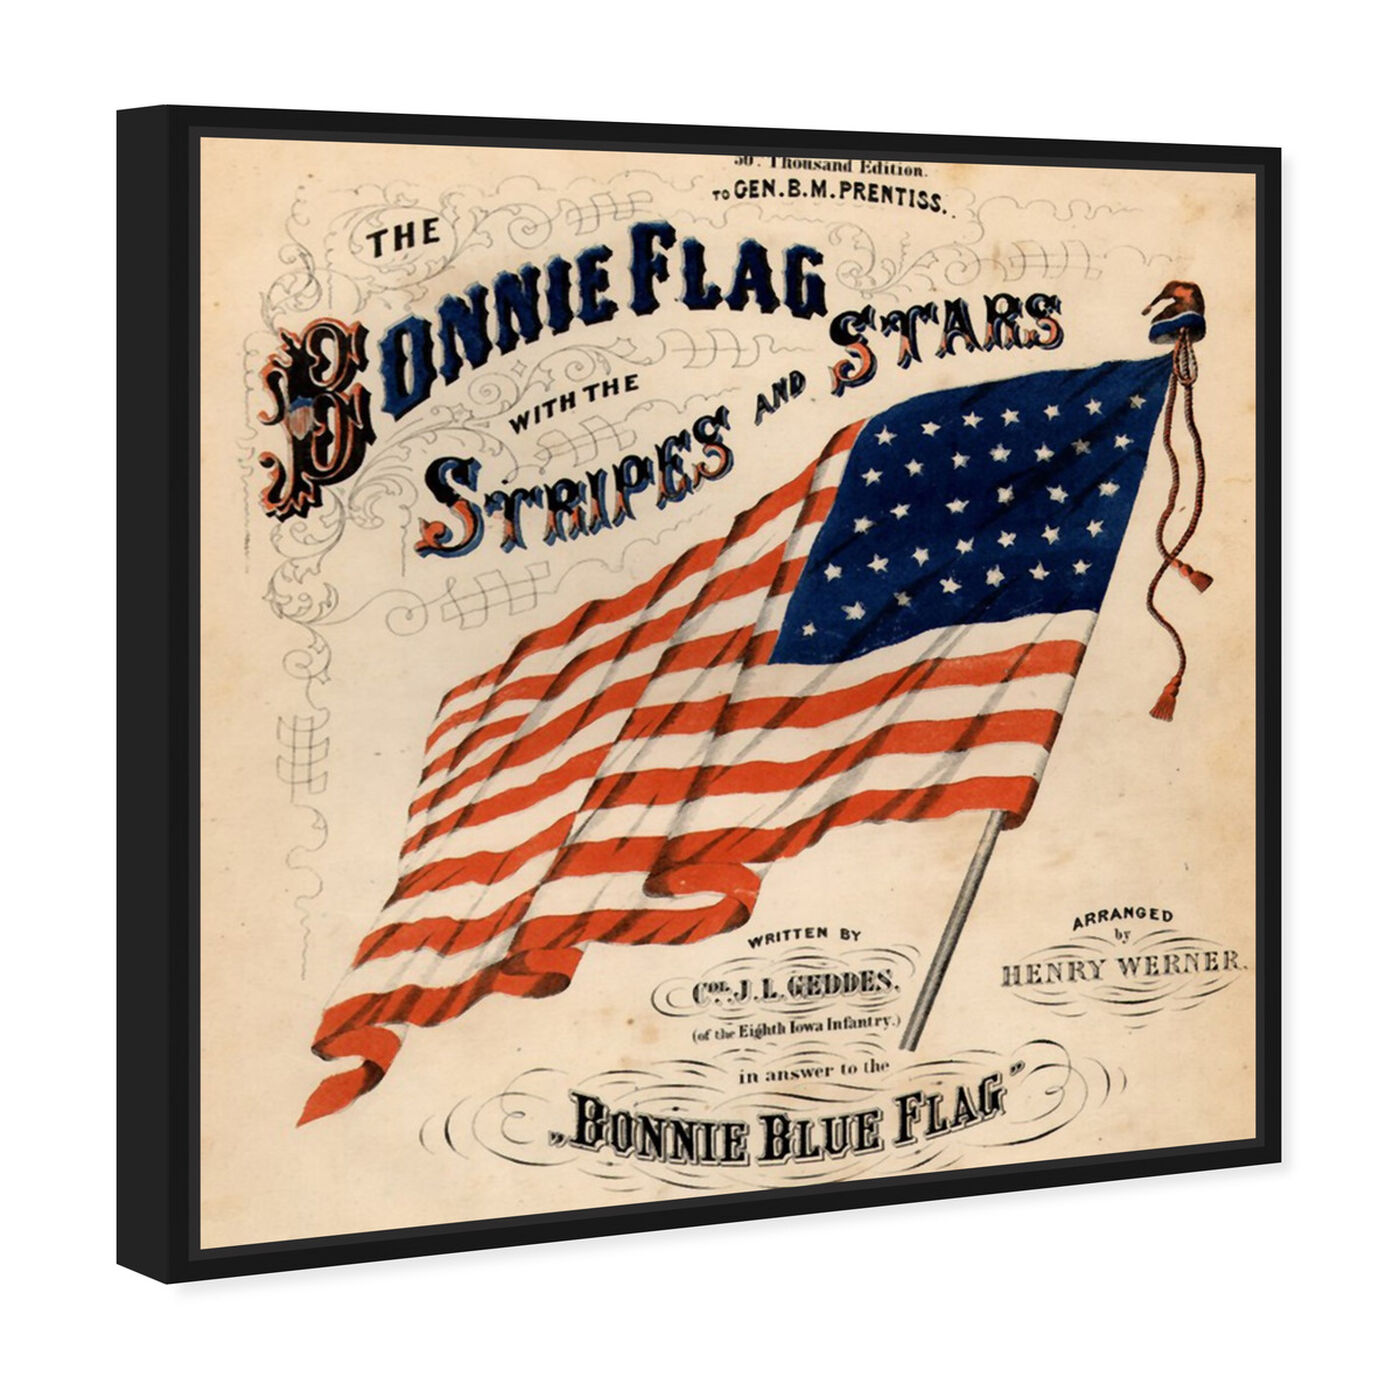 Angled view of Bonnie Flag featuring americana and patriotic and us flags art.